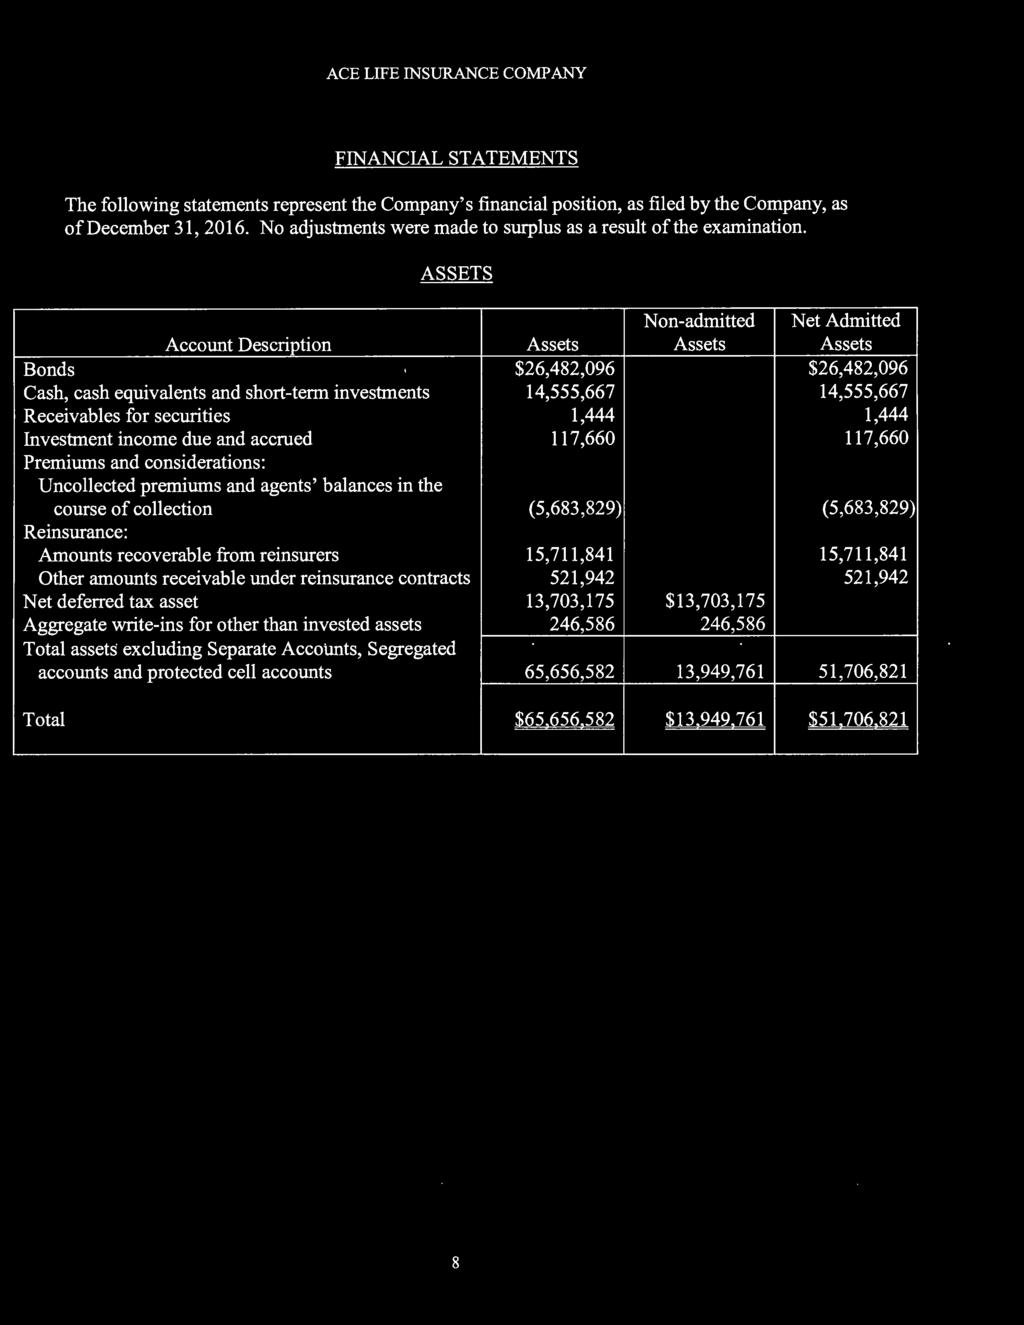 FINANCIAL STATEMENTS The following statements represent the Company's financial position, as filed by the Company, as of December 31, 2016.